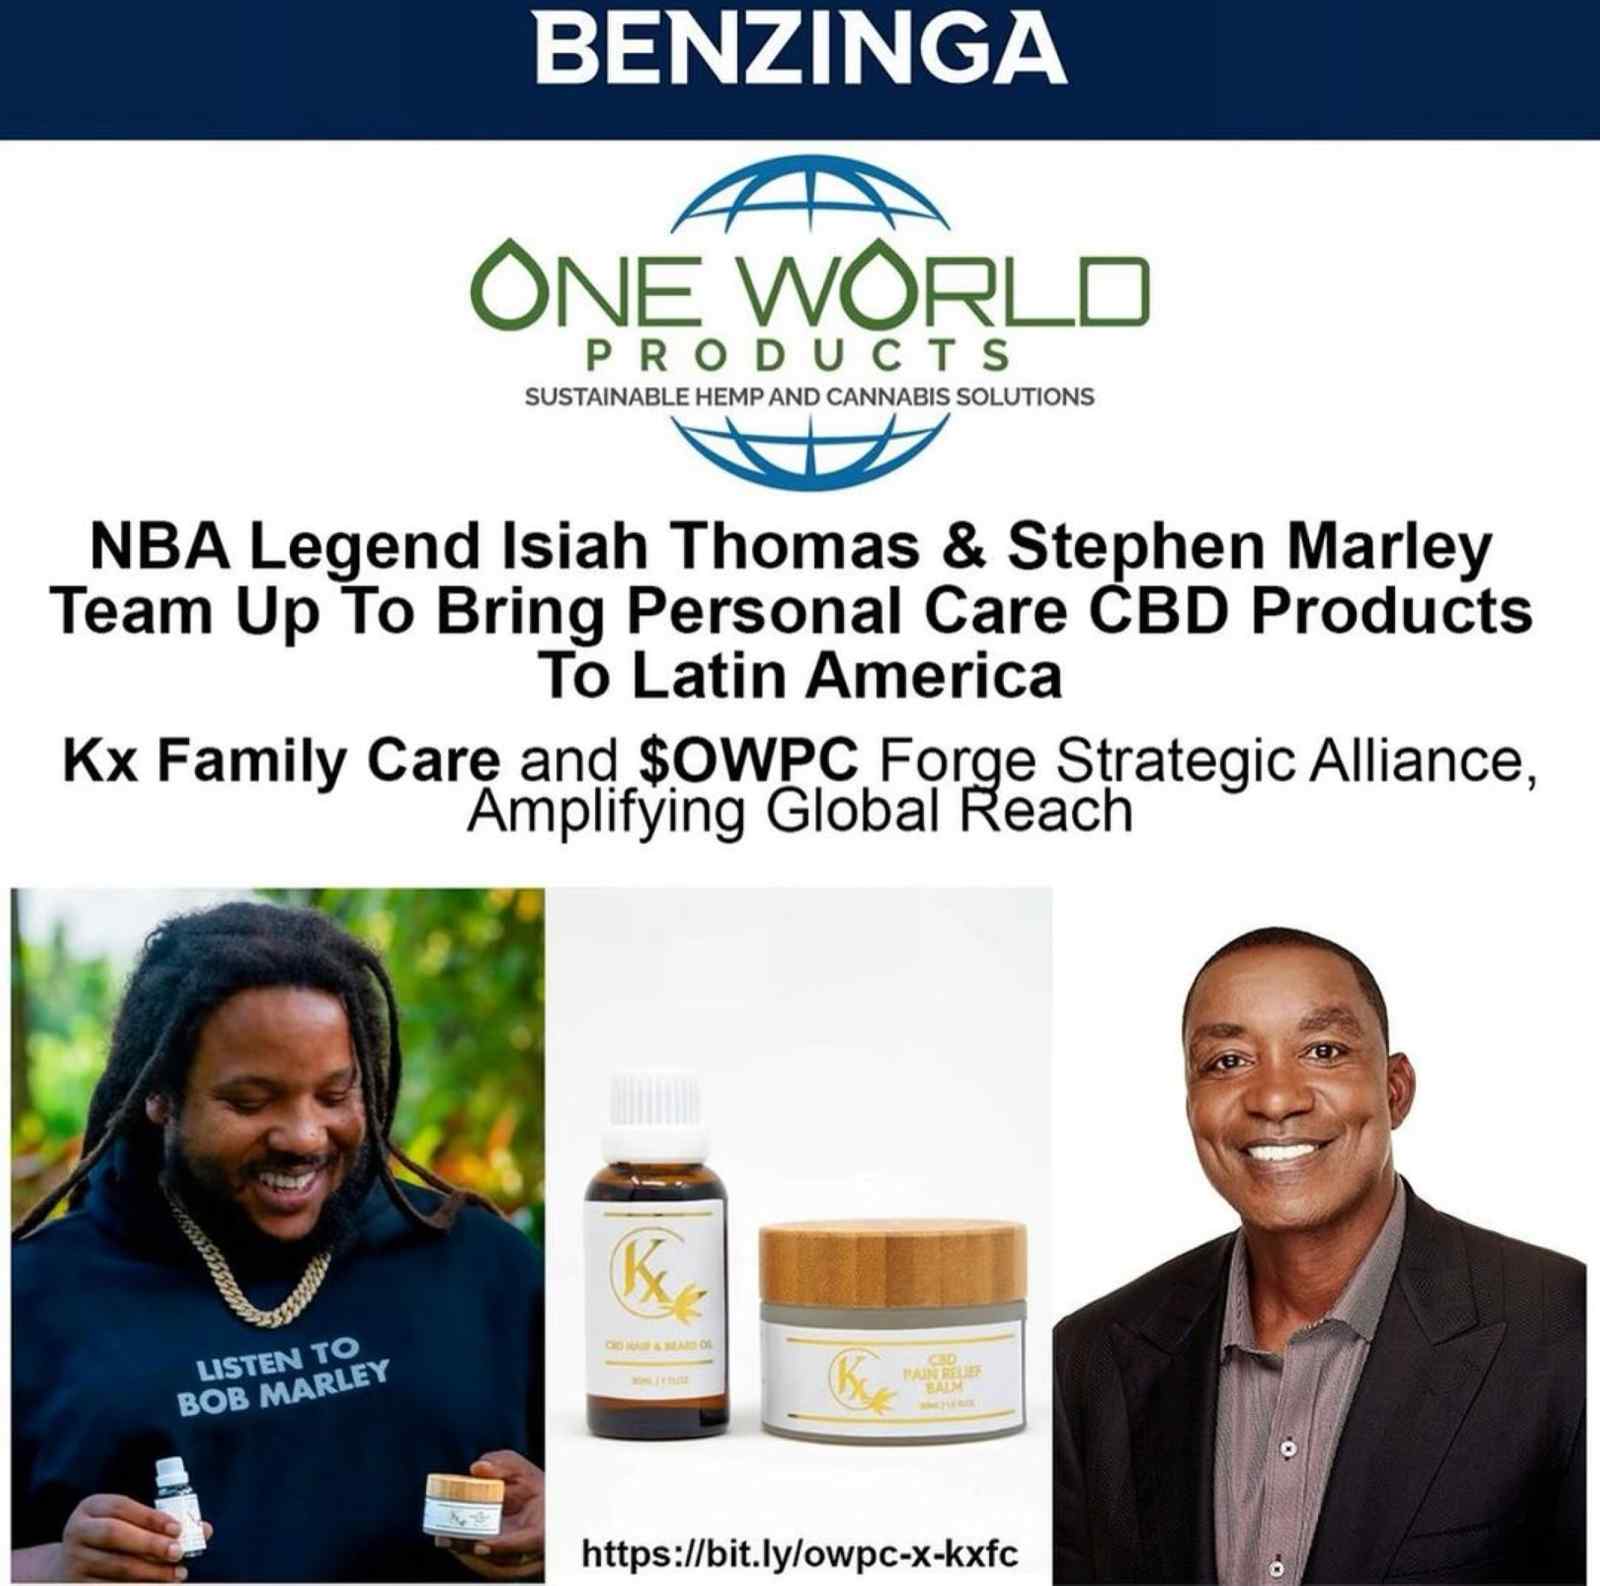 Kx Family Care and One World Products, Inc. Announce Partnership